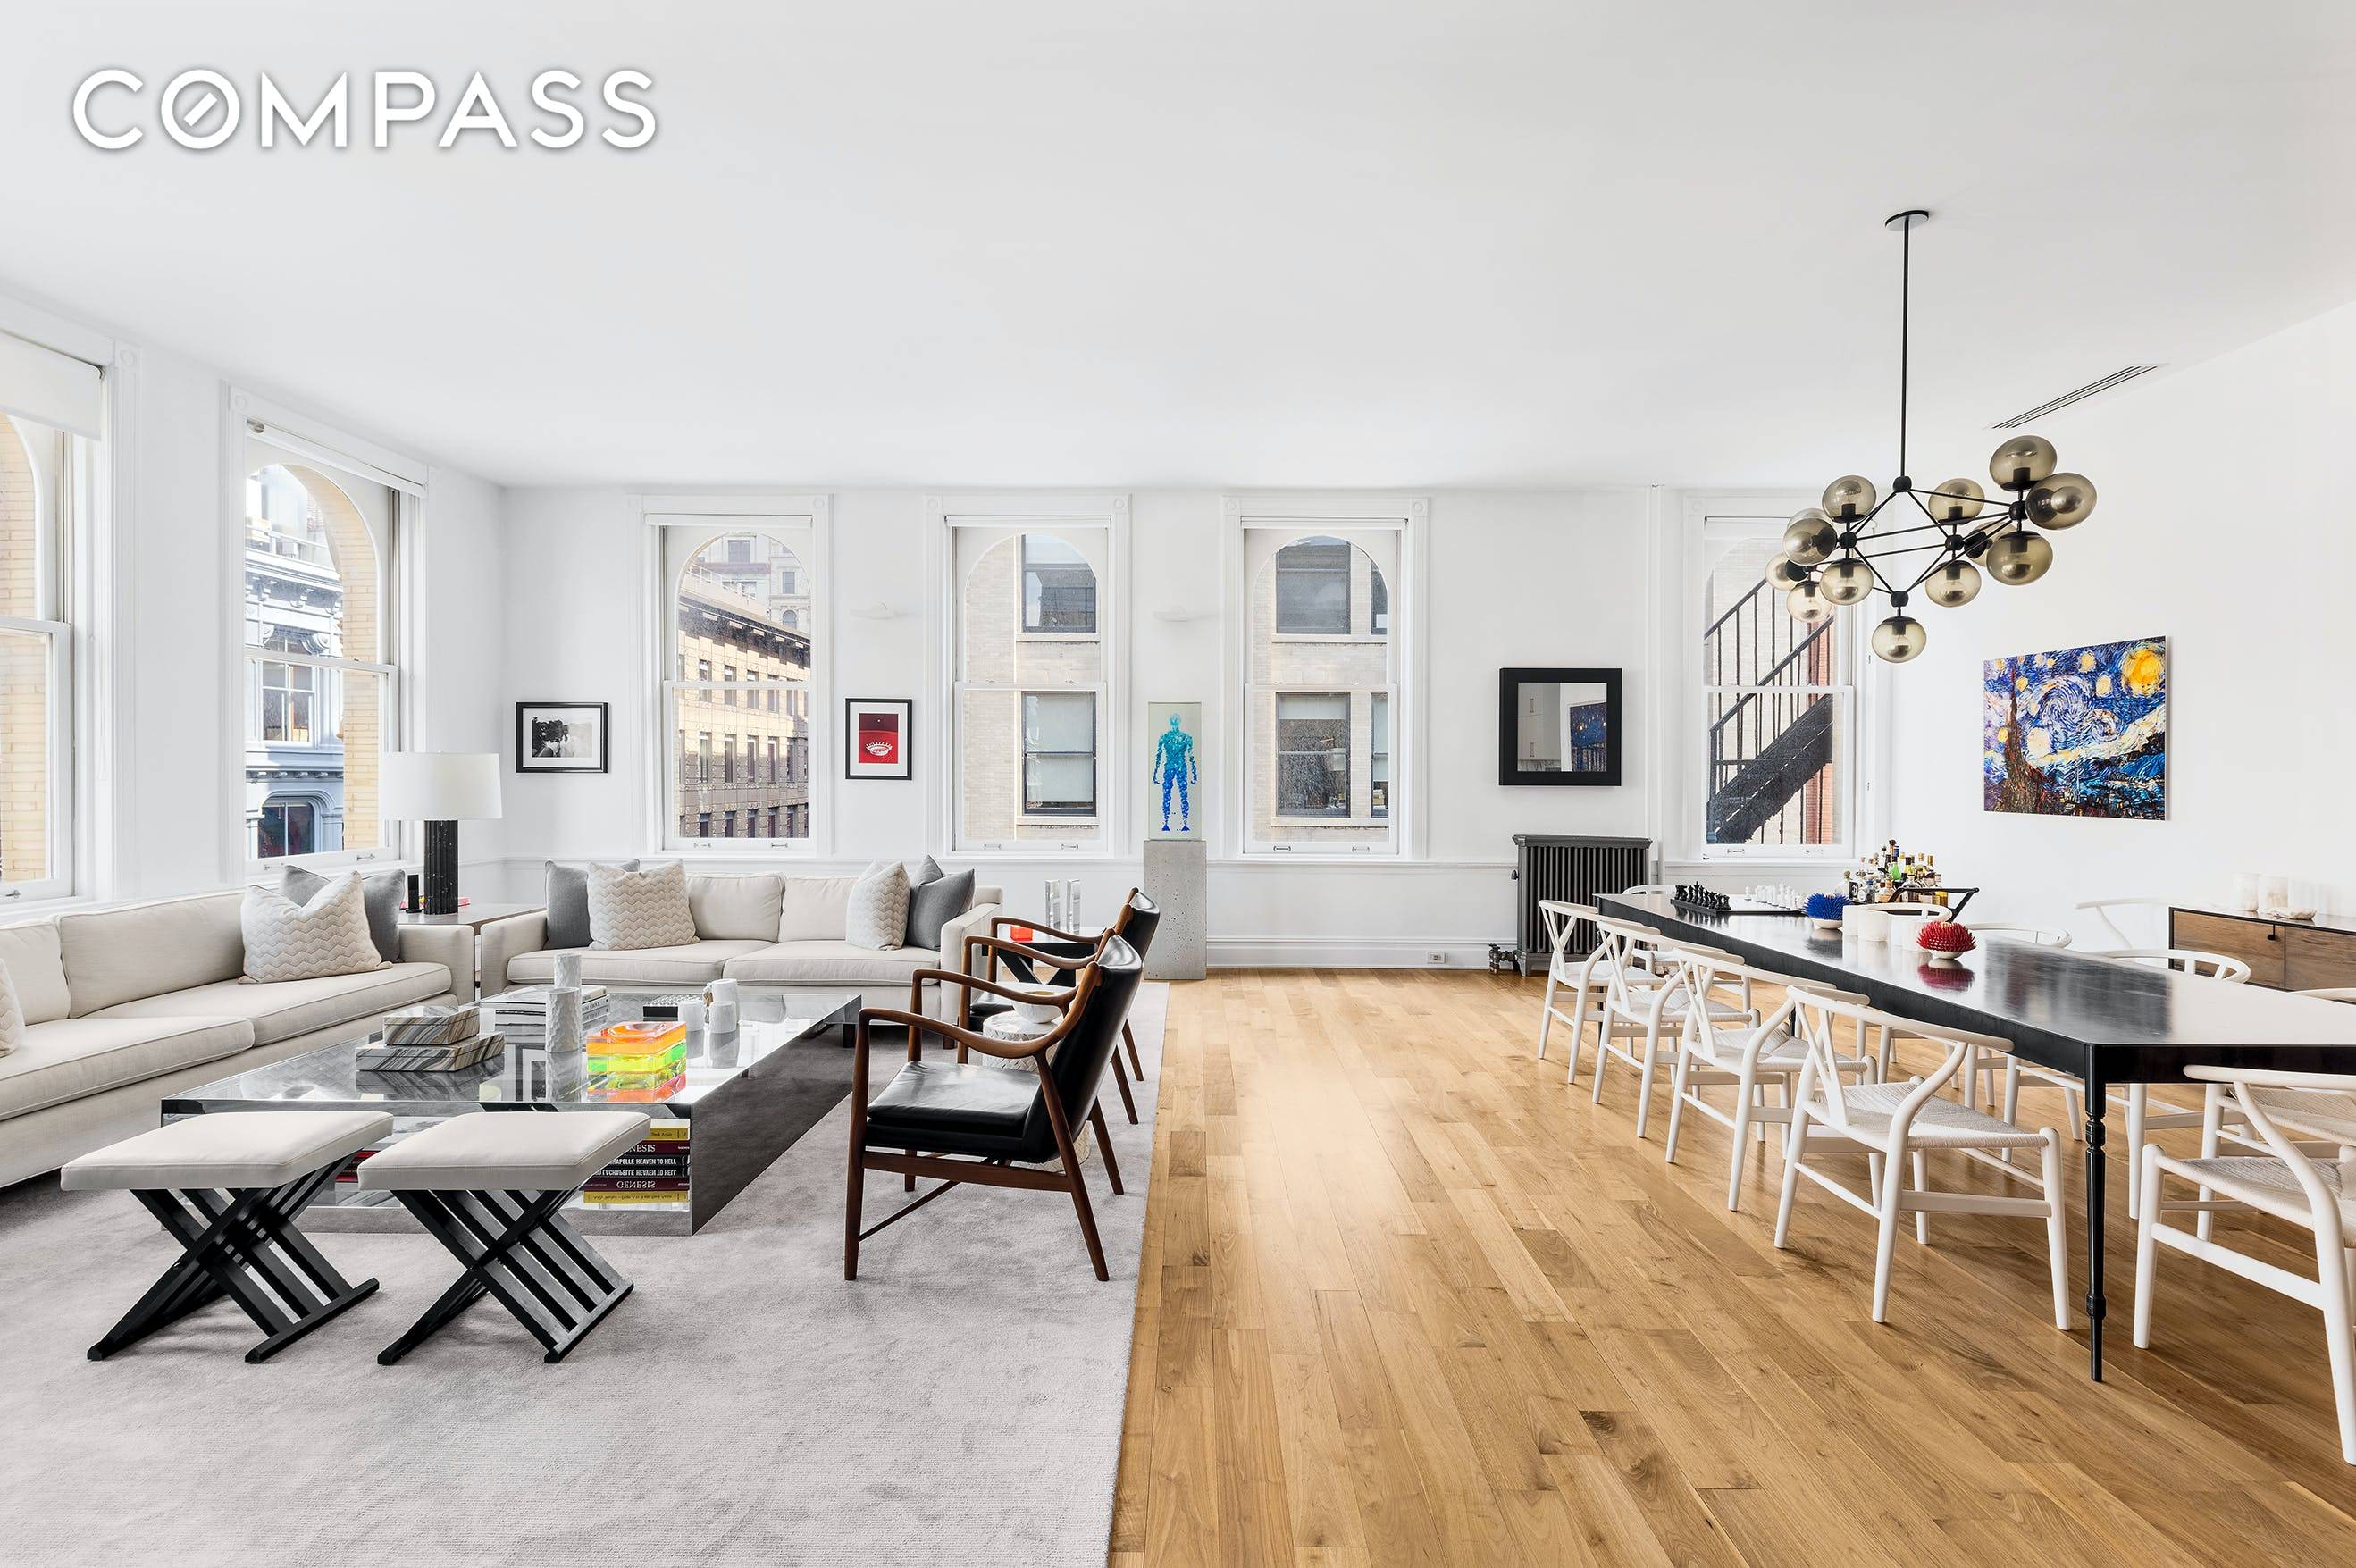 Situated at the intersection of Spring Mercer in the heart of Soho, 5N is a dramatic corner loft featuring 11 foot ceilings and 12 arched windows facing east and north.